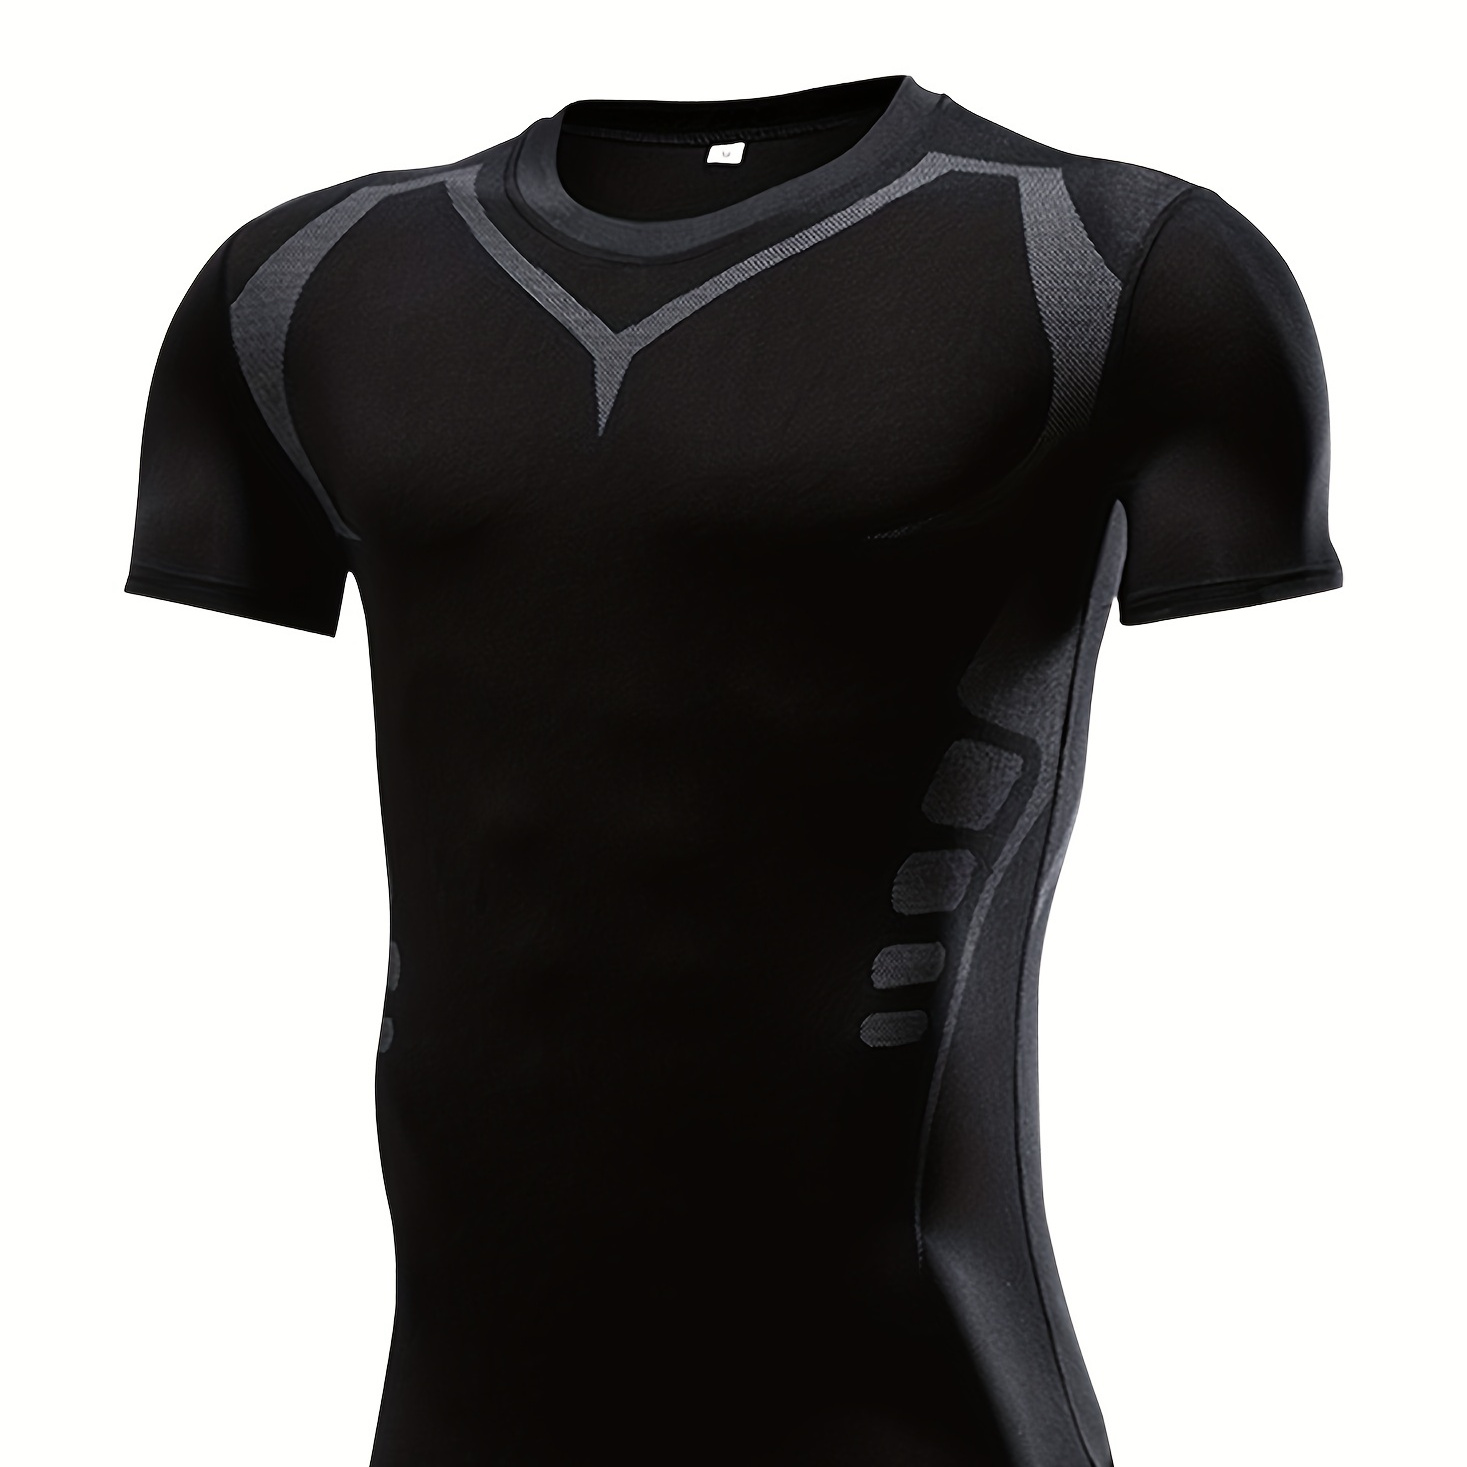 

Men's Quick-drying Sports T-shirt: Comfort & Breathability For Outdoor Gym & Running!